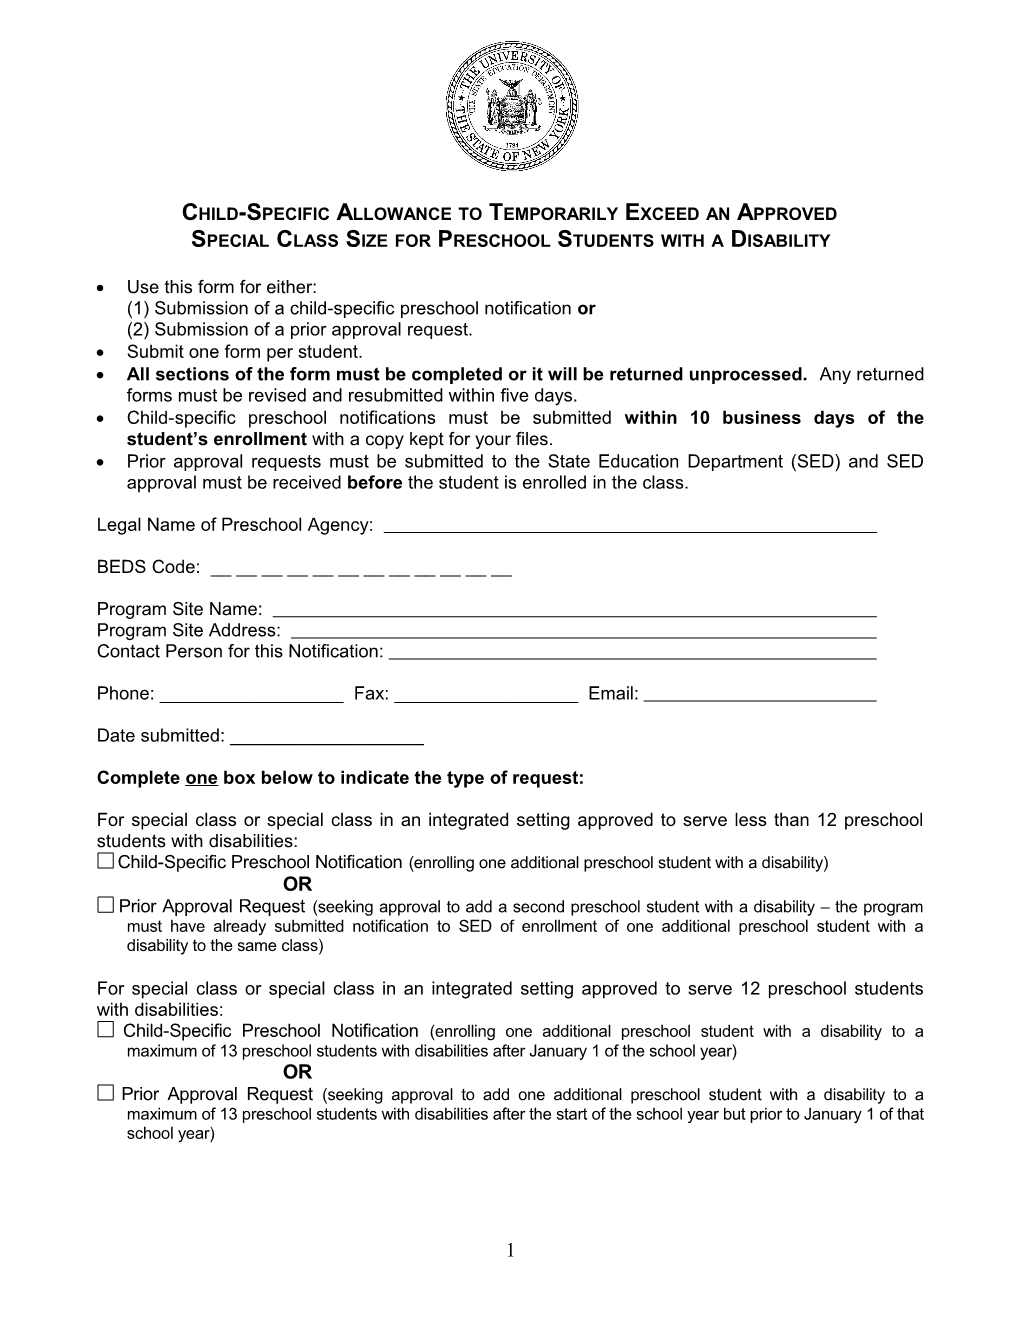 Child-Specific Allowance to Temporarily Exceed an Approved